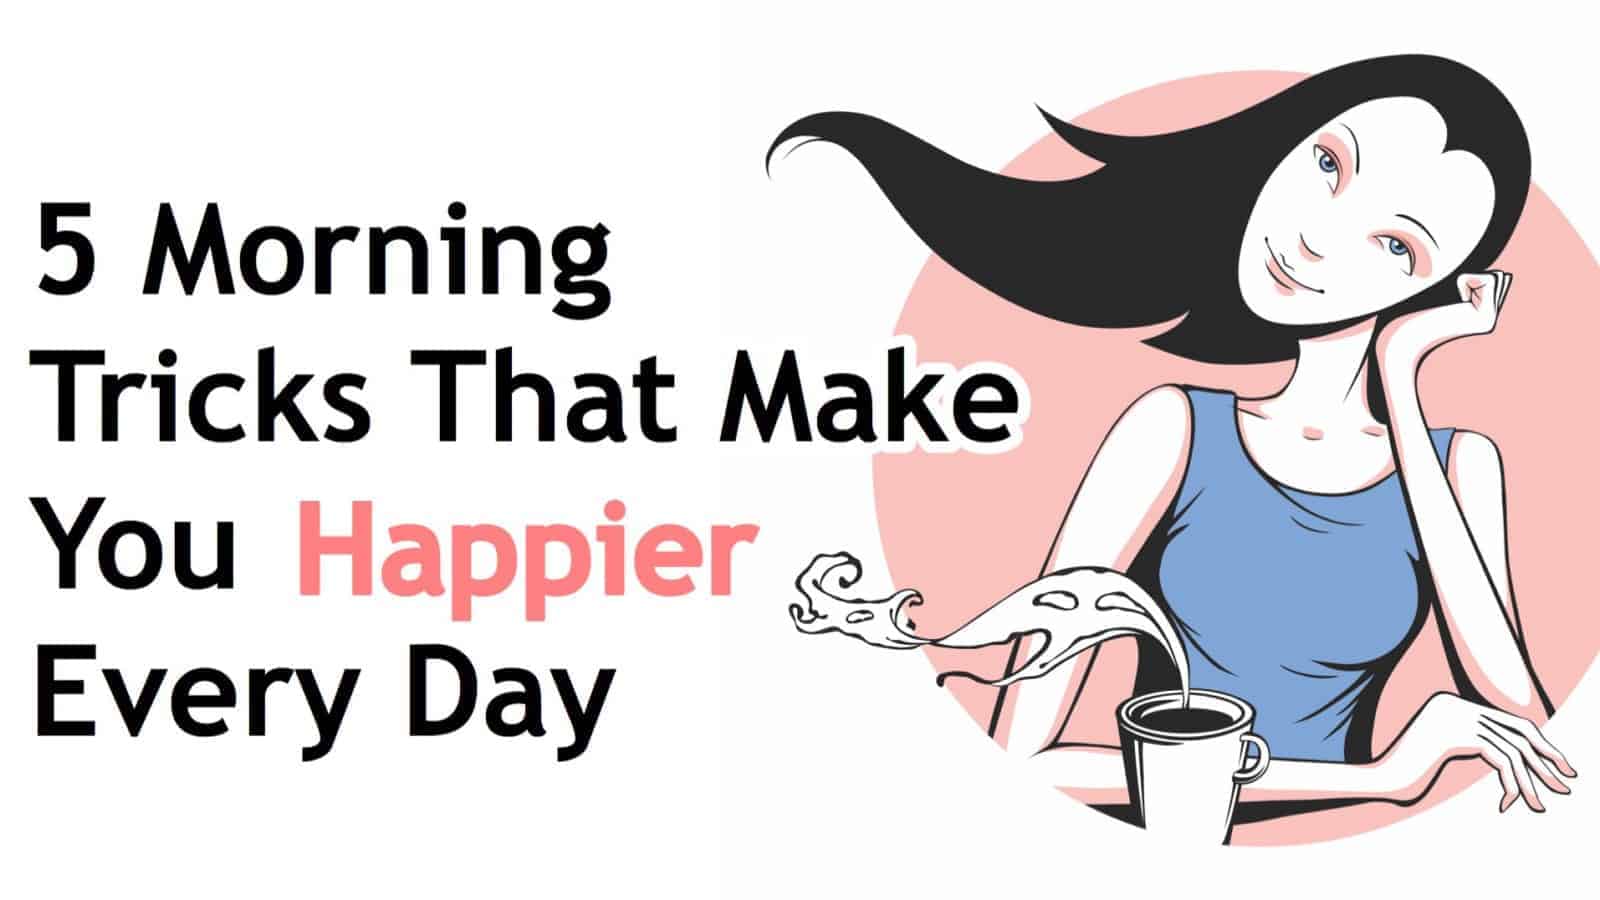 5 Morning Tricks That Make You Happier Every Day